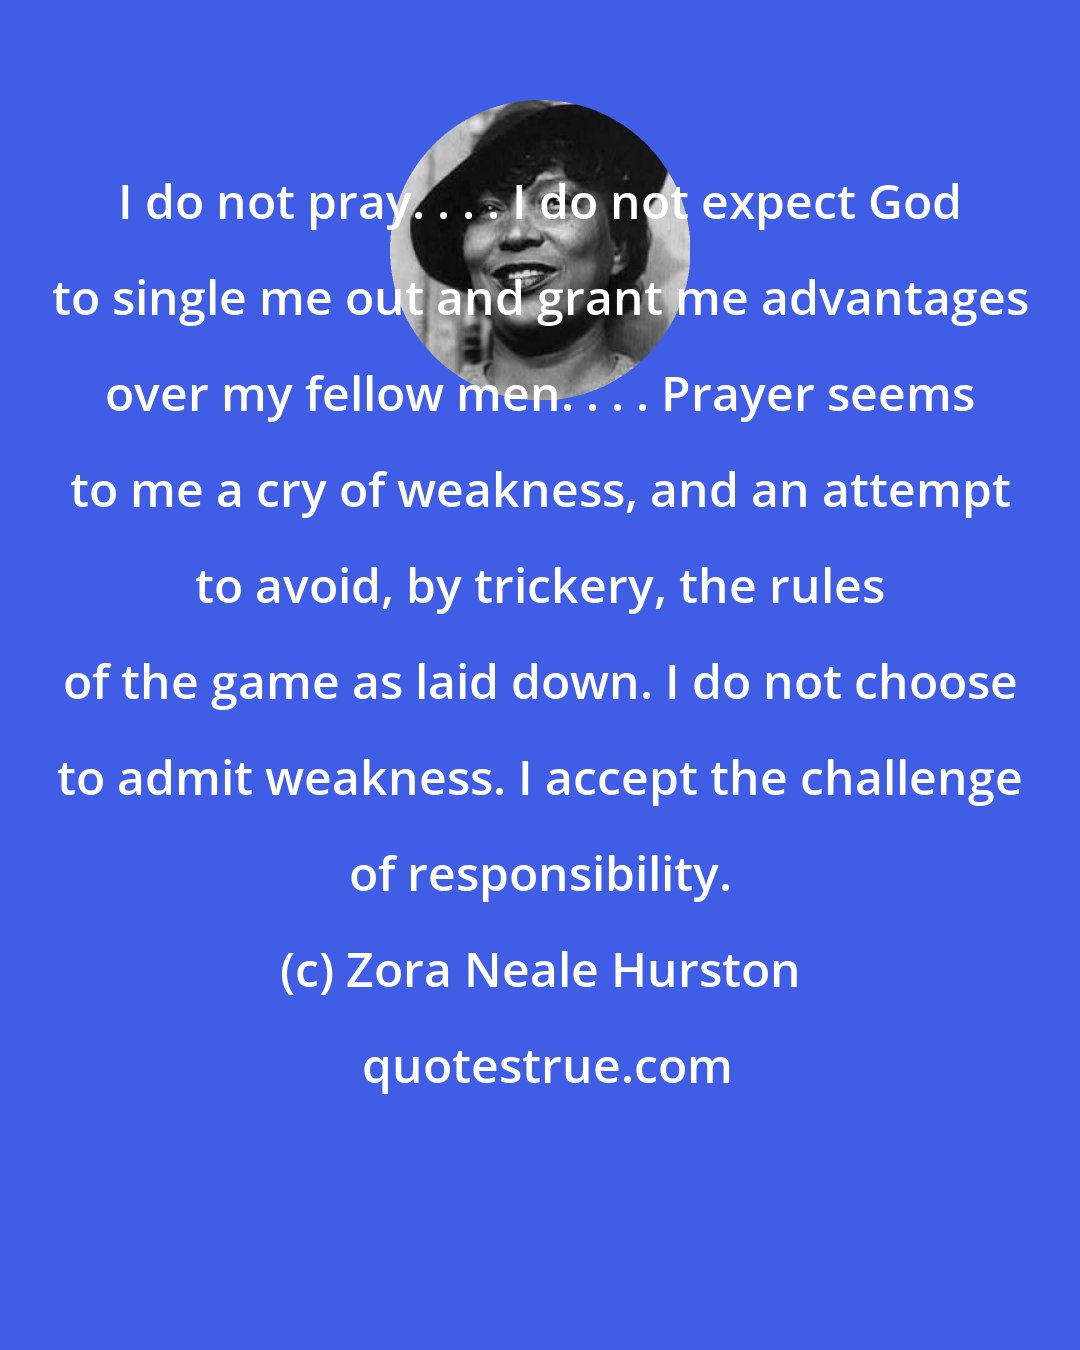 Zora Neale Hurston: I do not pray. . . . I do not expect God to single me out and grant me advantages over my fellow men. . . . Prayer seems to me a cry of weakness, and an attempt to avoid, by trickery, the rules of the game as laid down. I do not choose to admit weakness. I accept the challenge of responsibility.